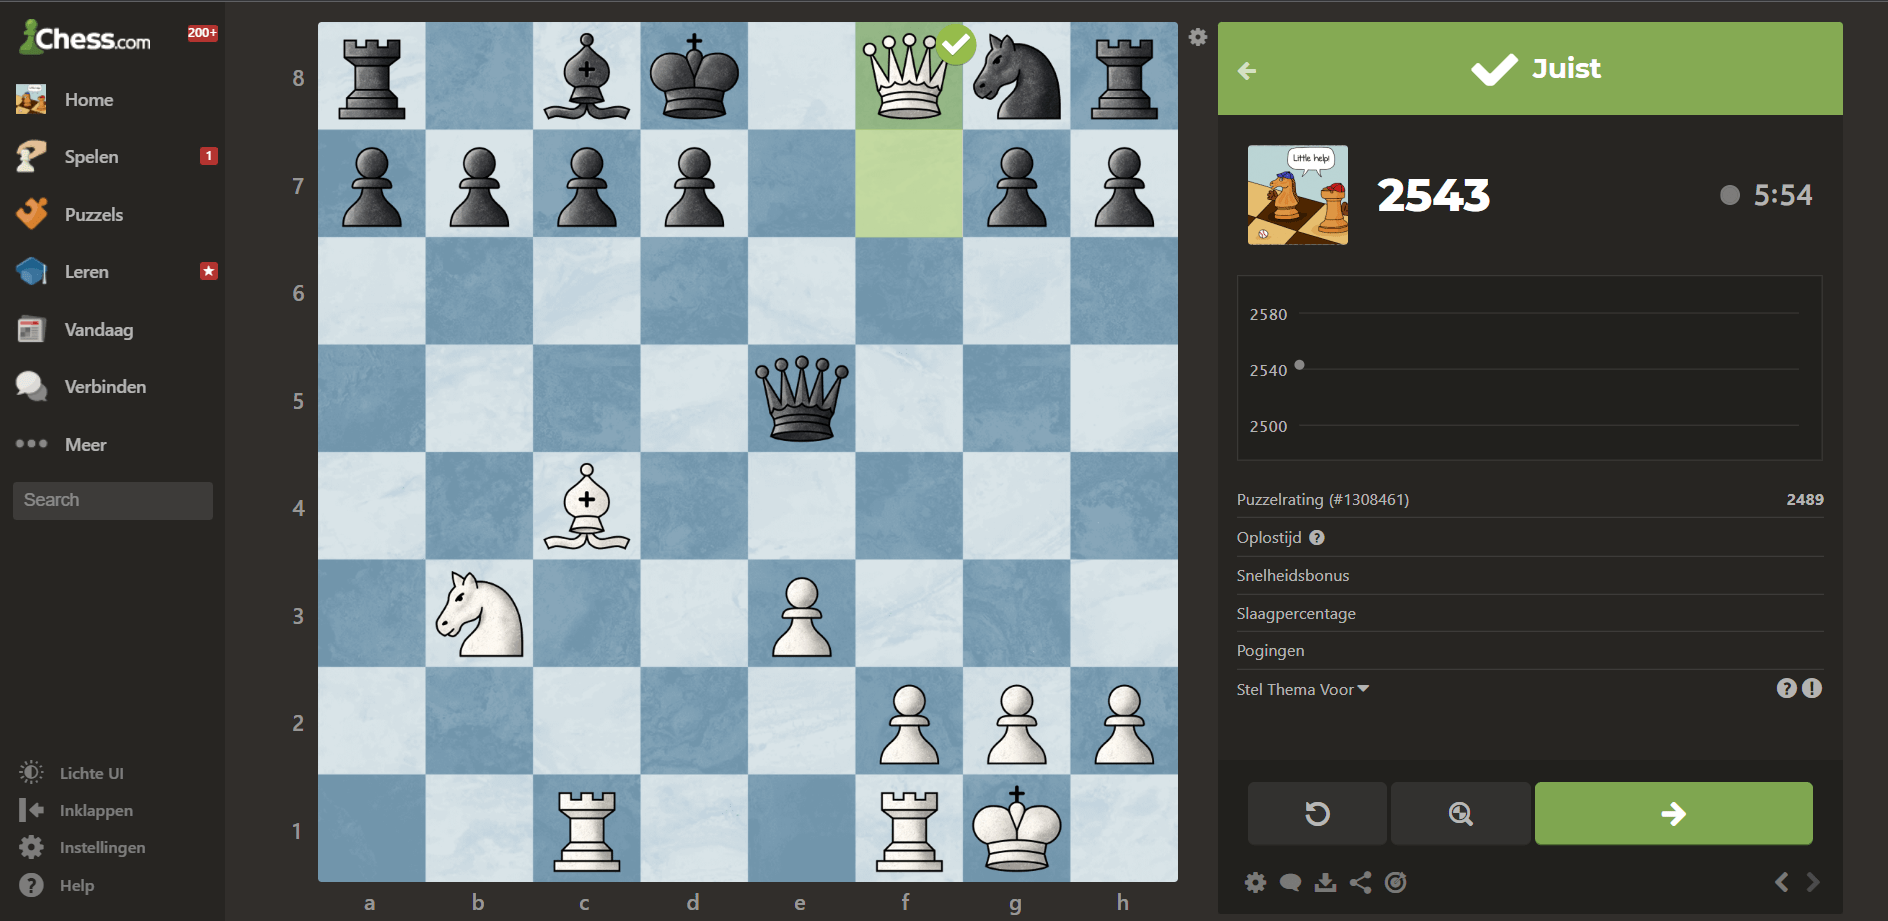 My puzzle rating just went down 500 points - Chess Forums 